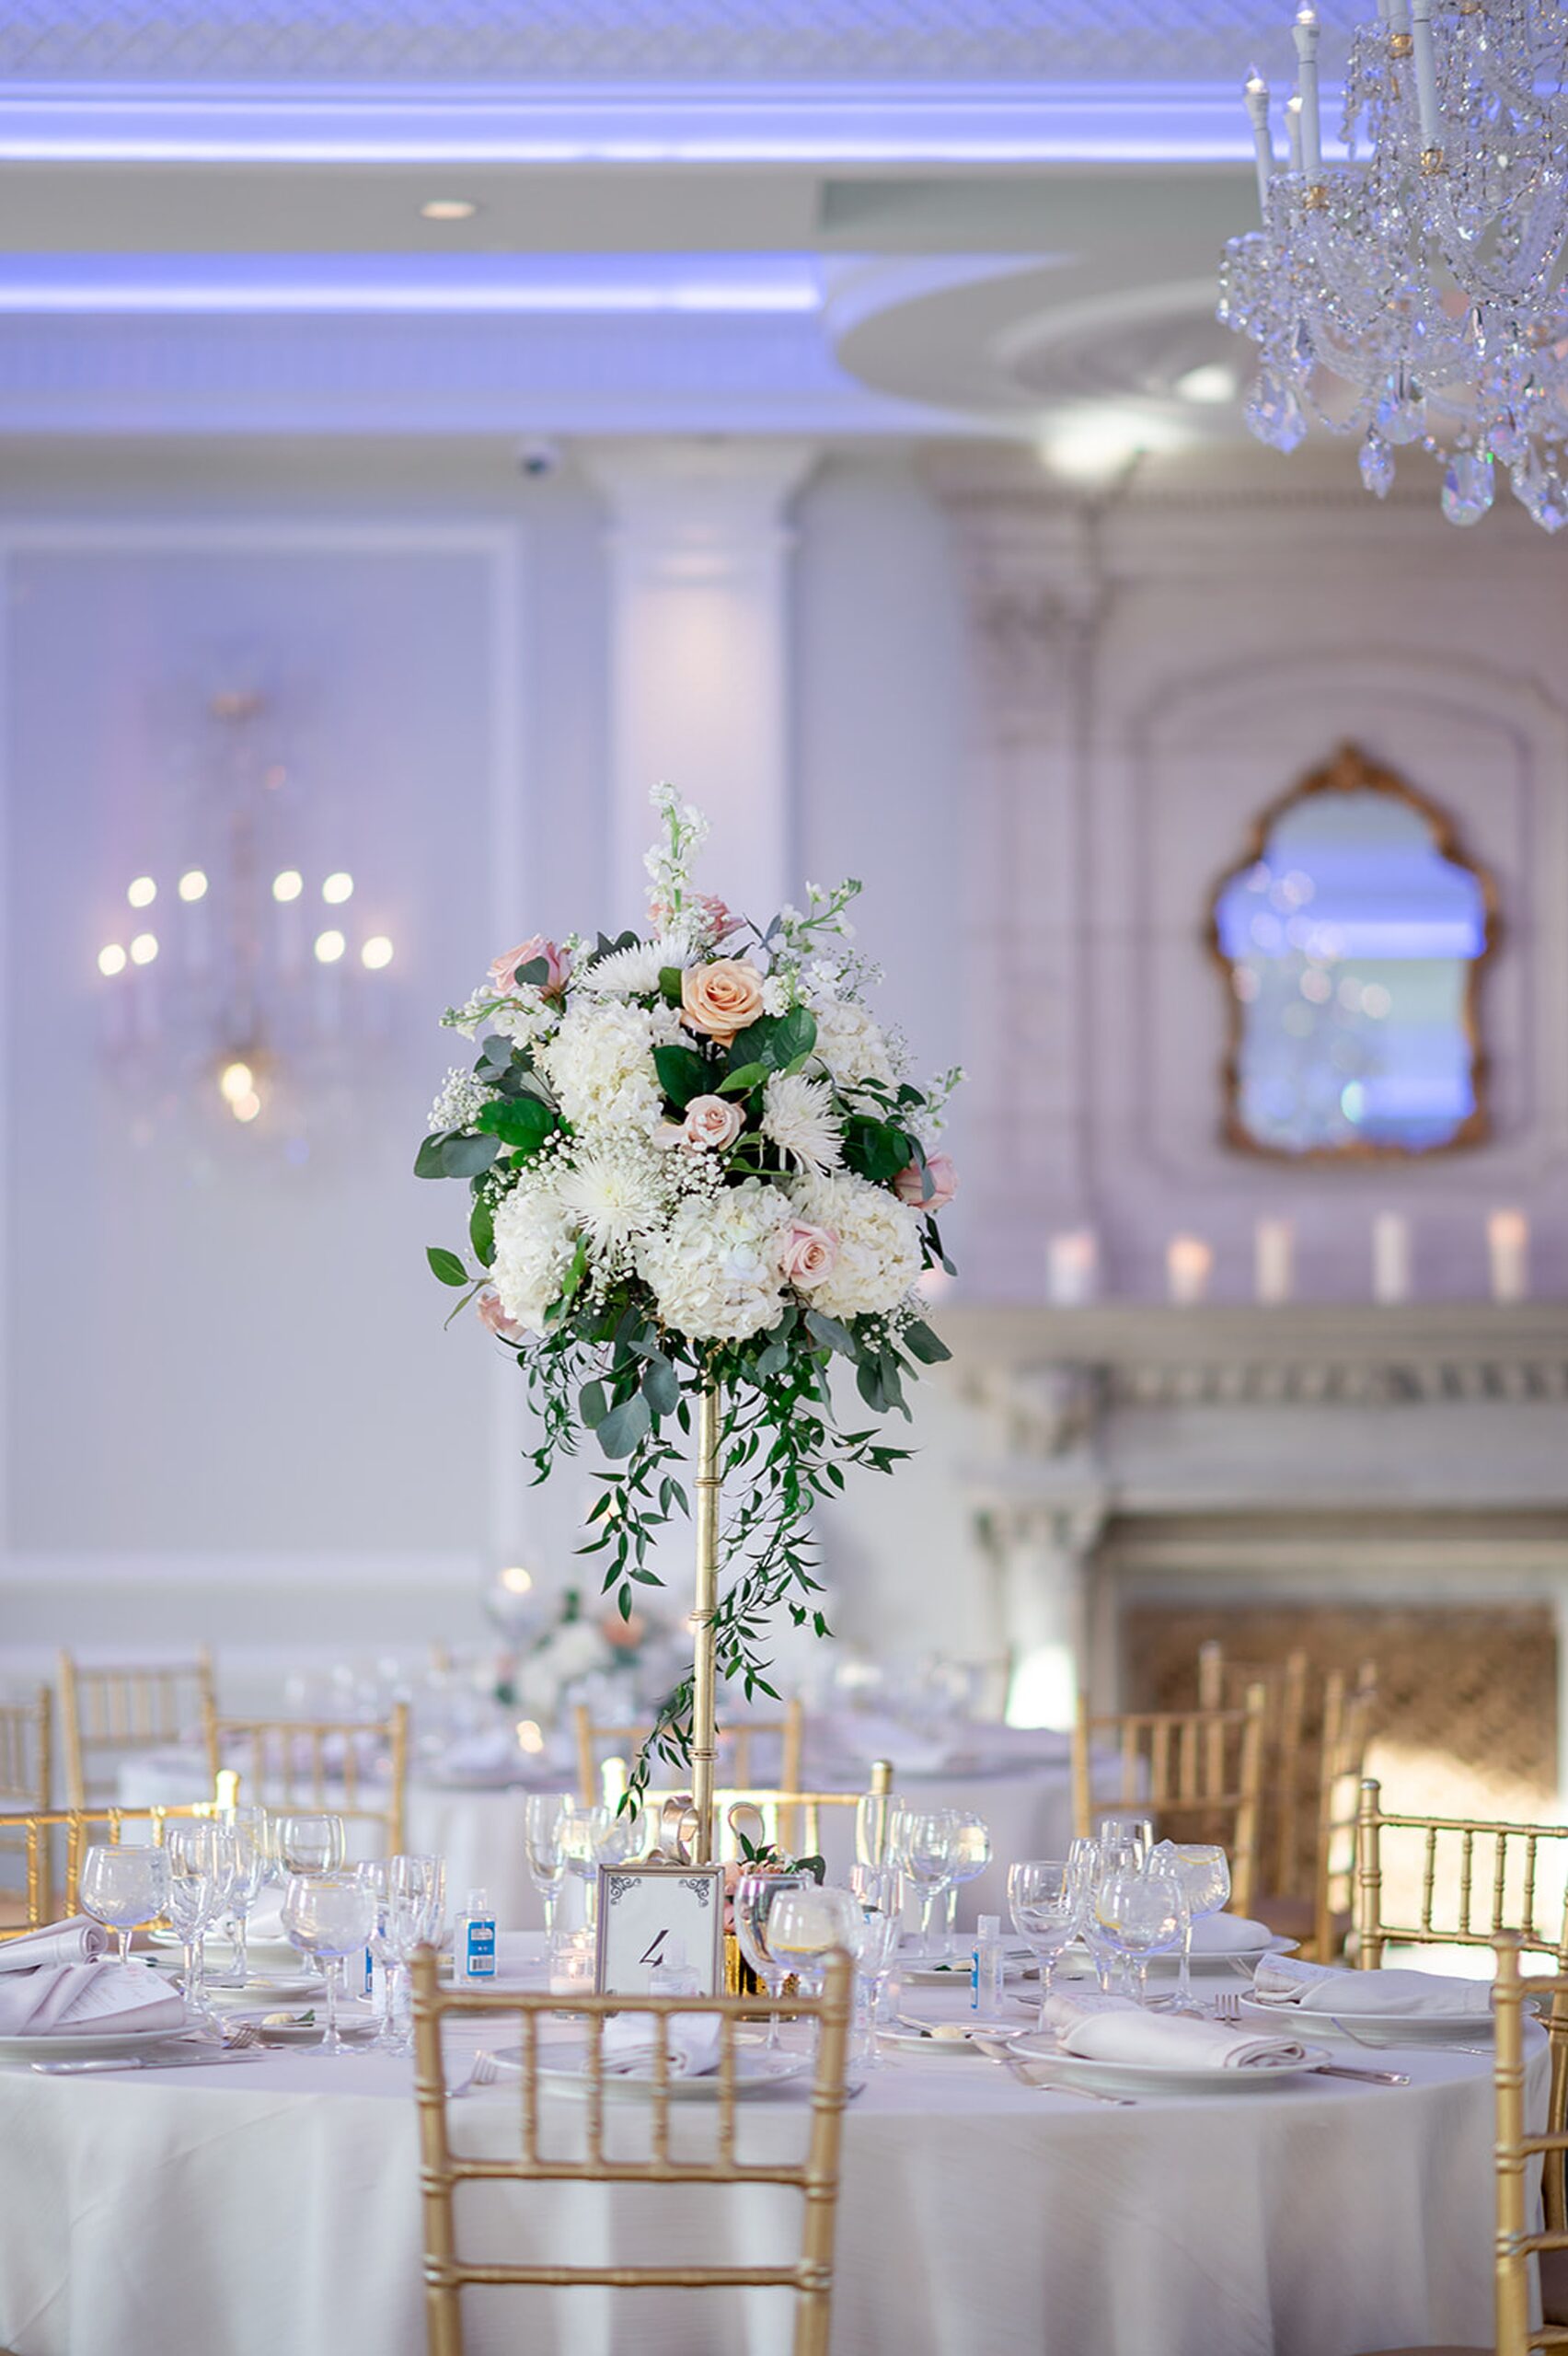 Details of a wedding reception table with a tall floral centerpiece and gold chairs